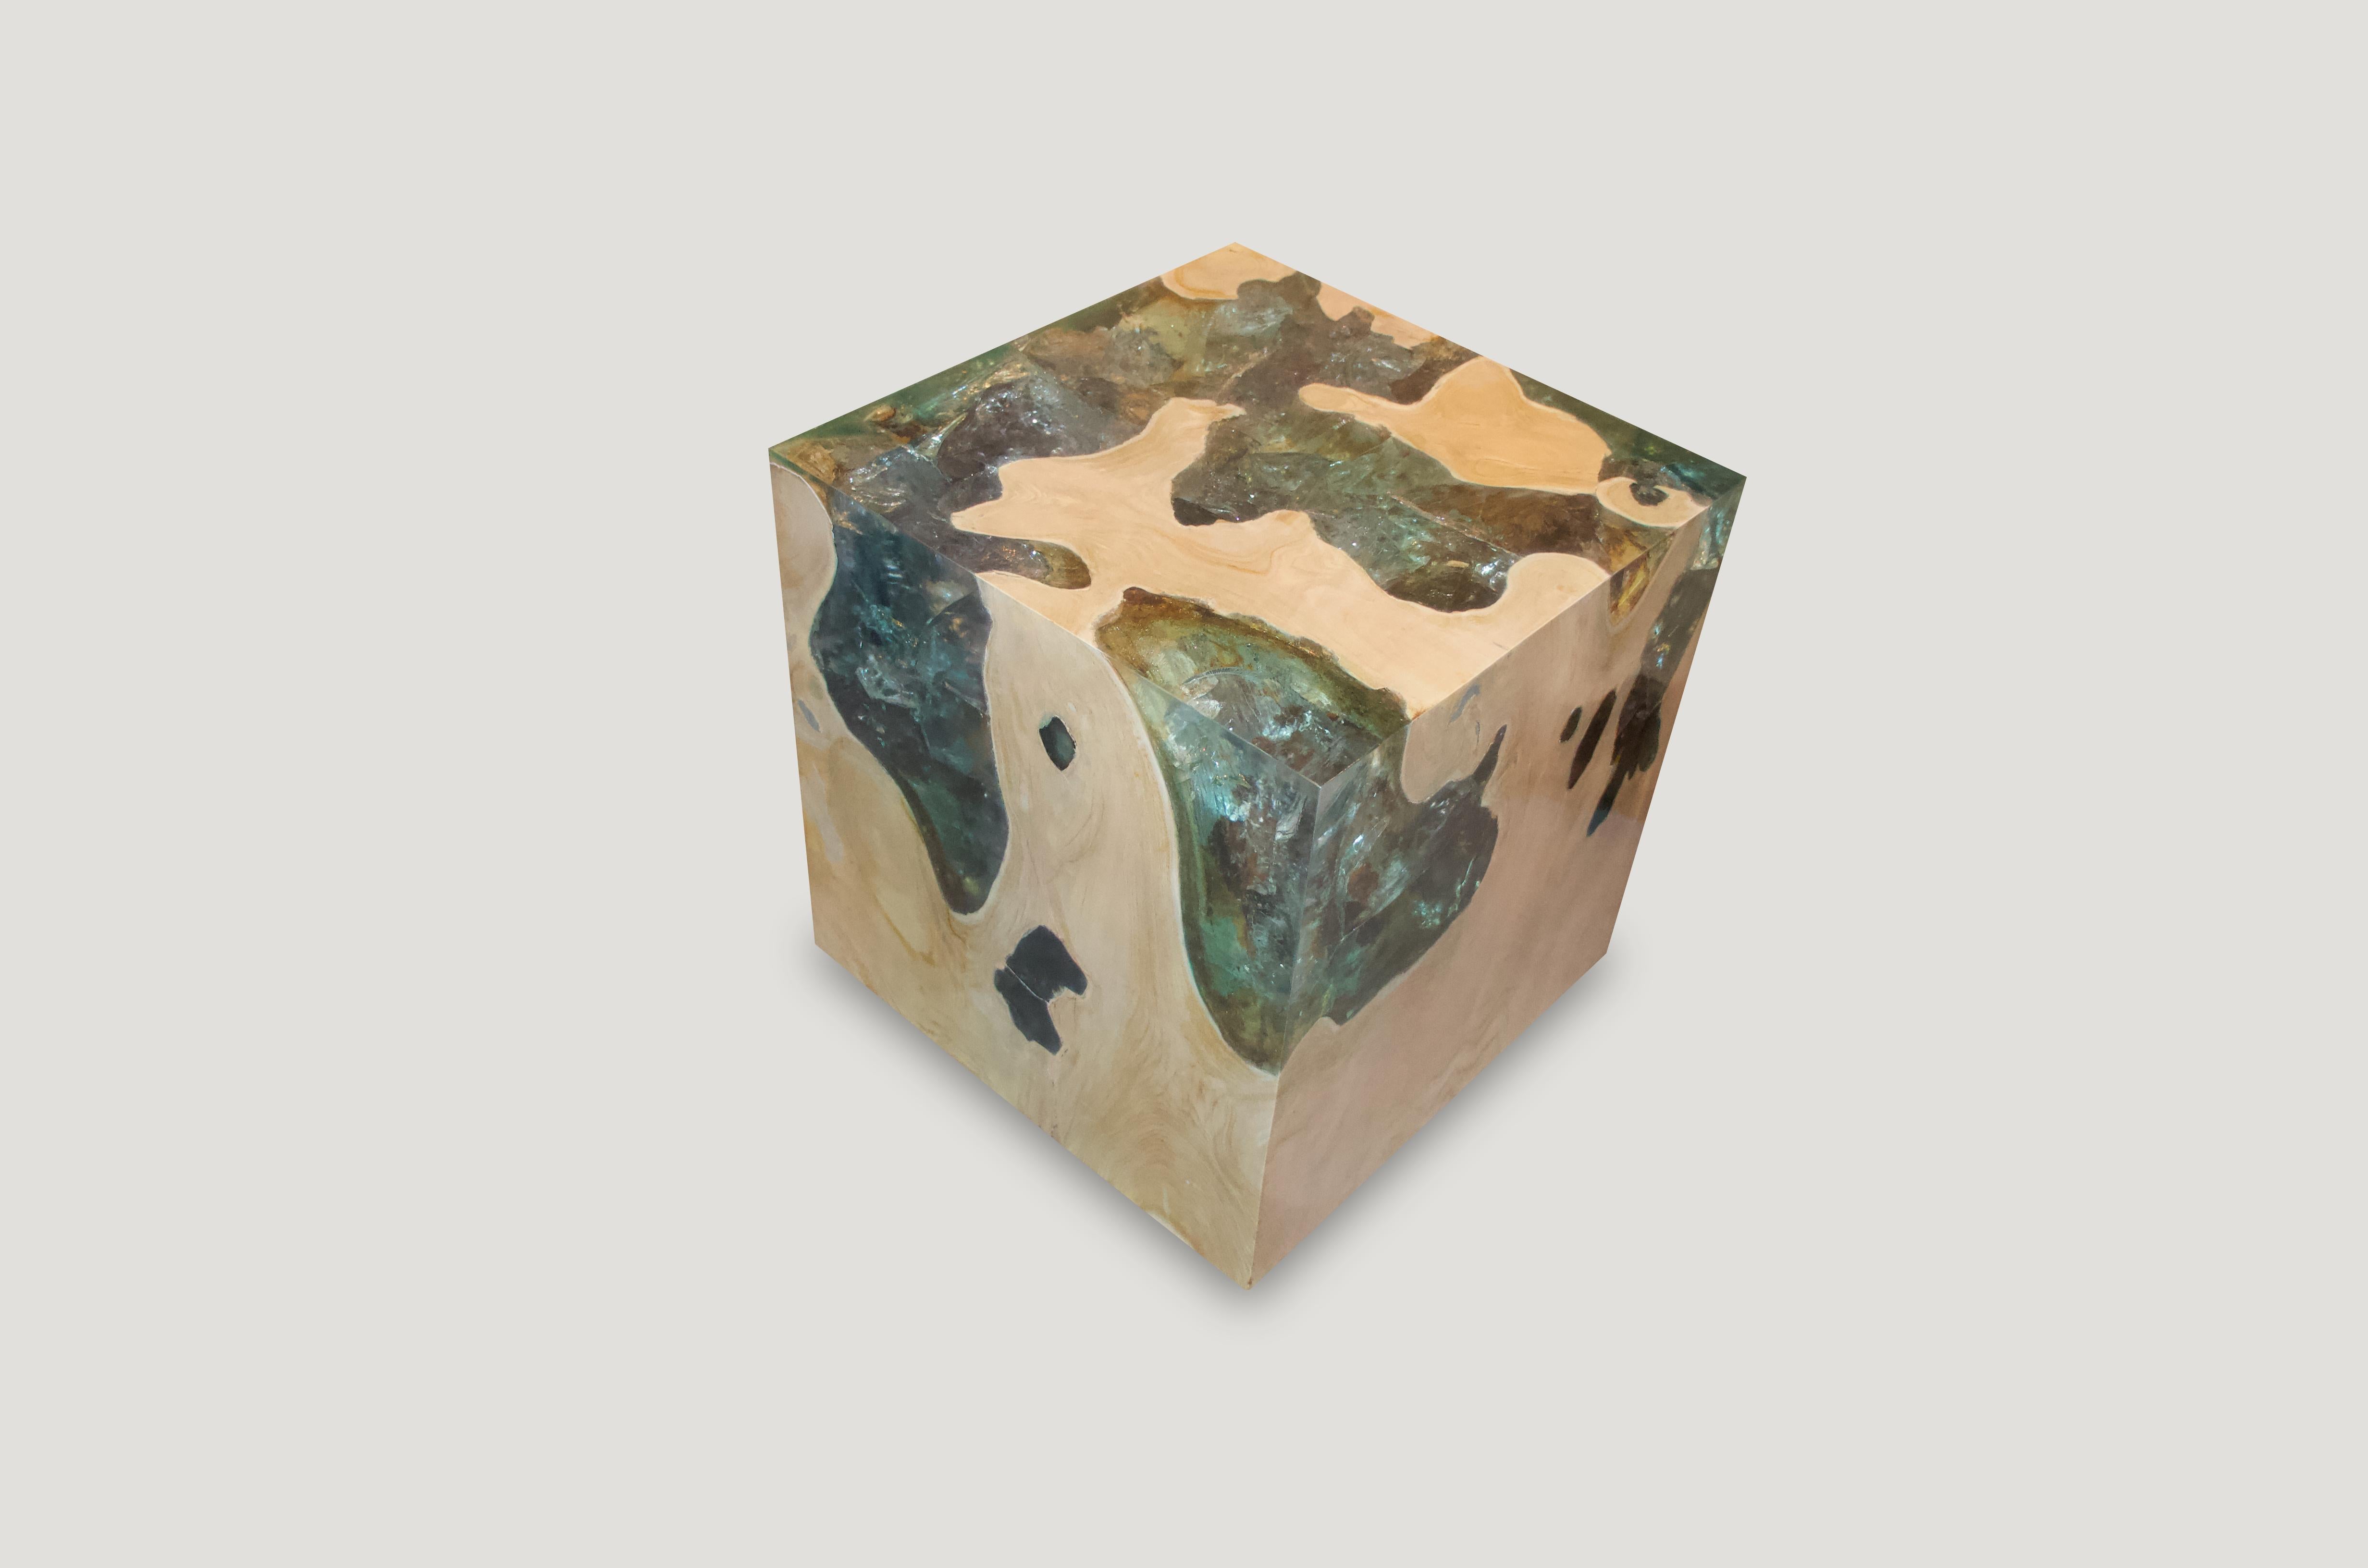 The St. Barts side table is a unique variation of the teak and cracked resin cube. Ice blue or aqua resin is first cracked and added into the natural grooves of the bleached teak wood, sanded and finished with a high polish. Handmade from reclaimed